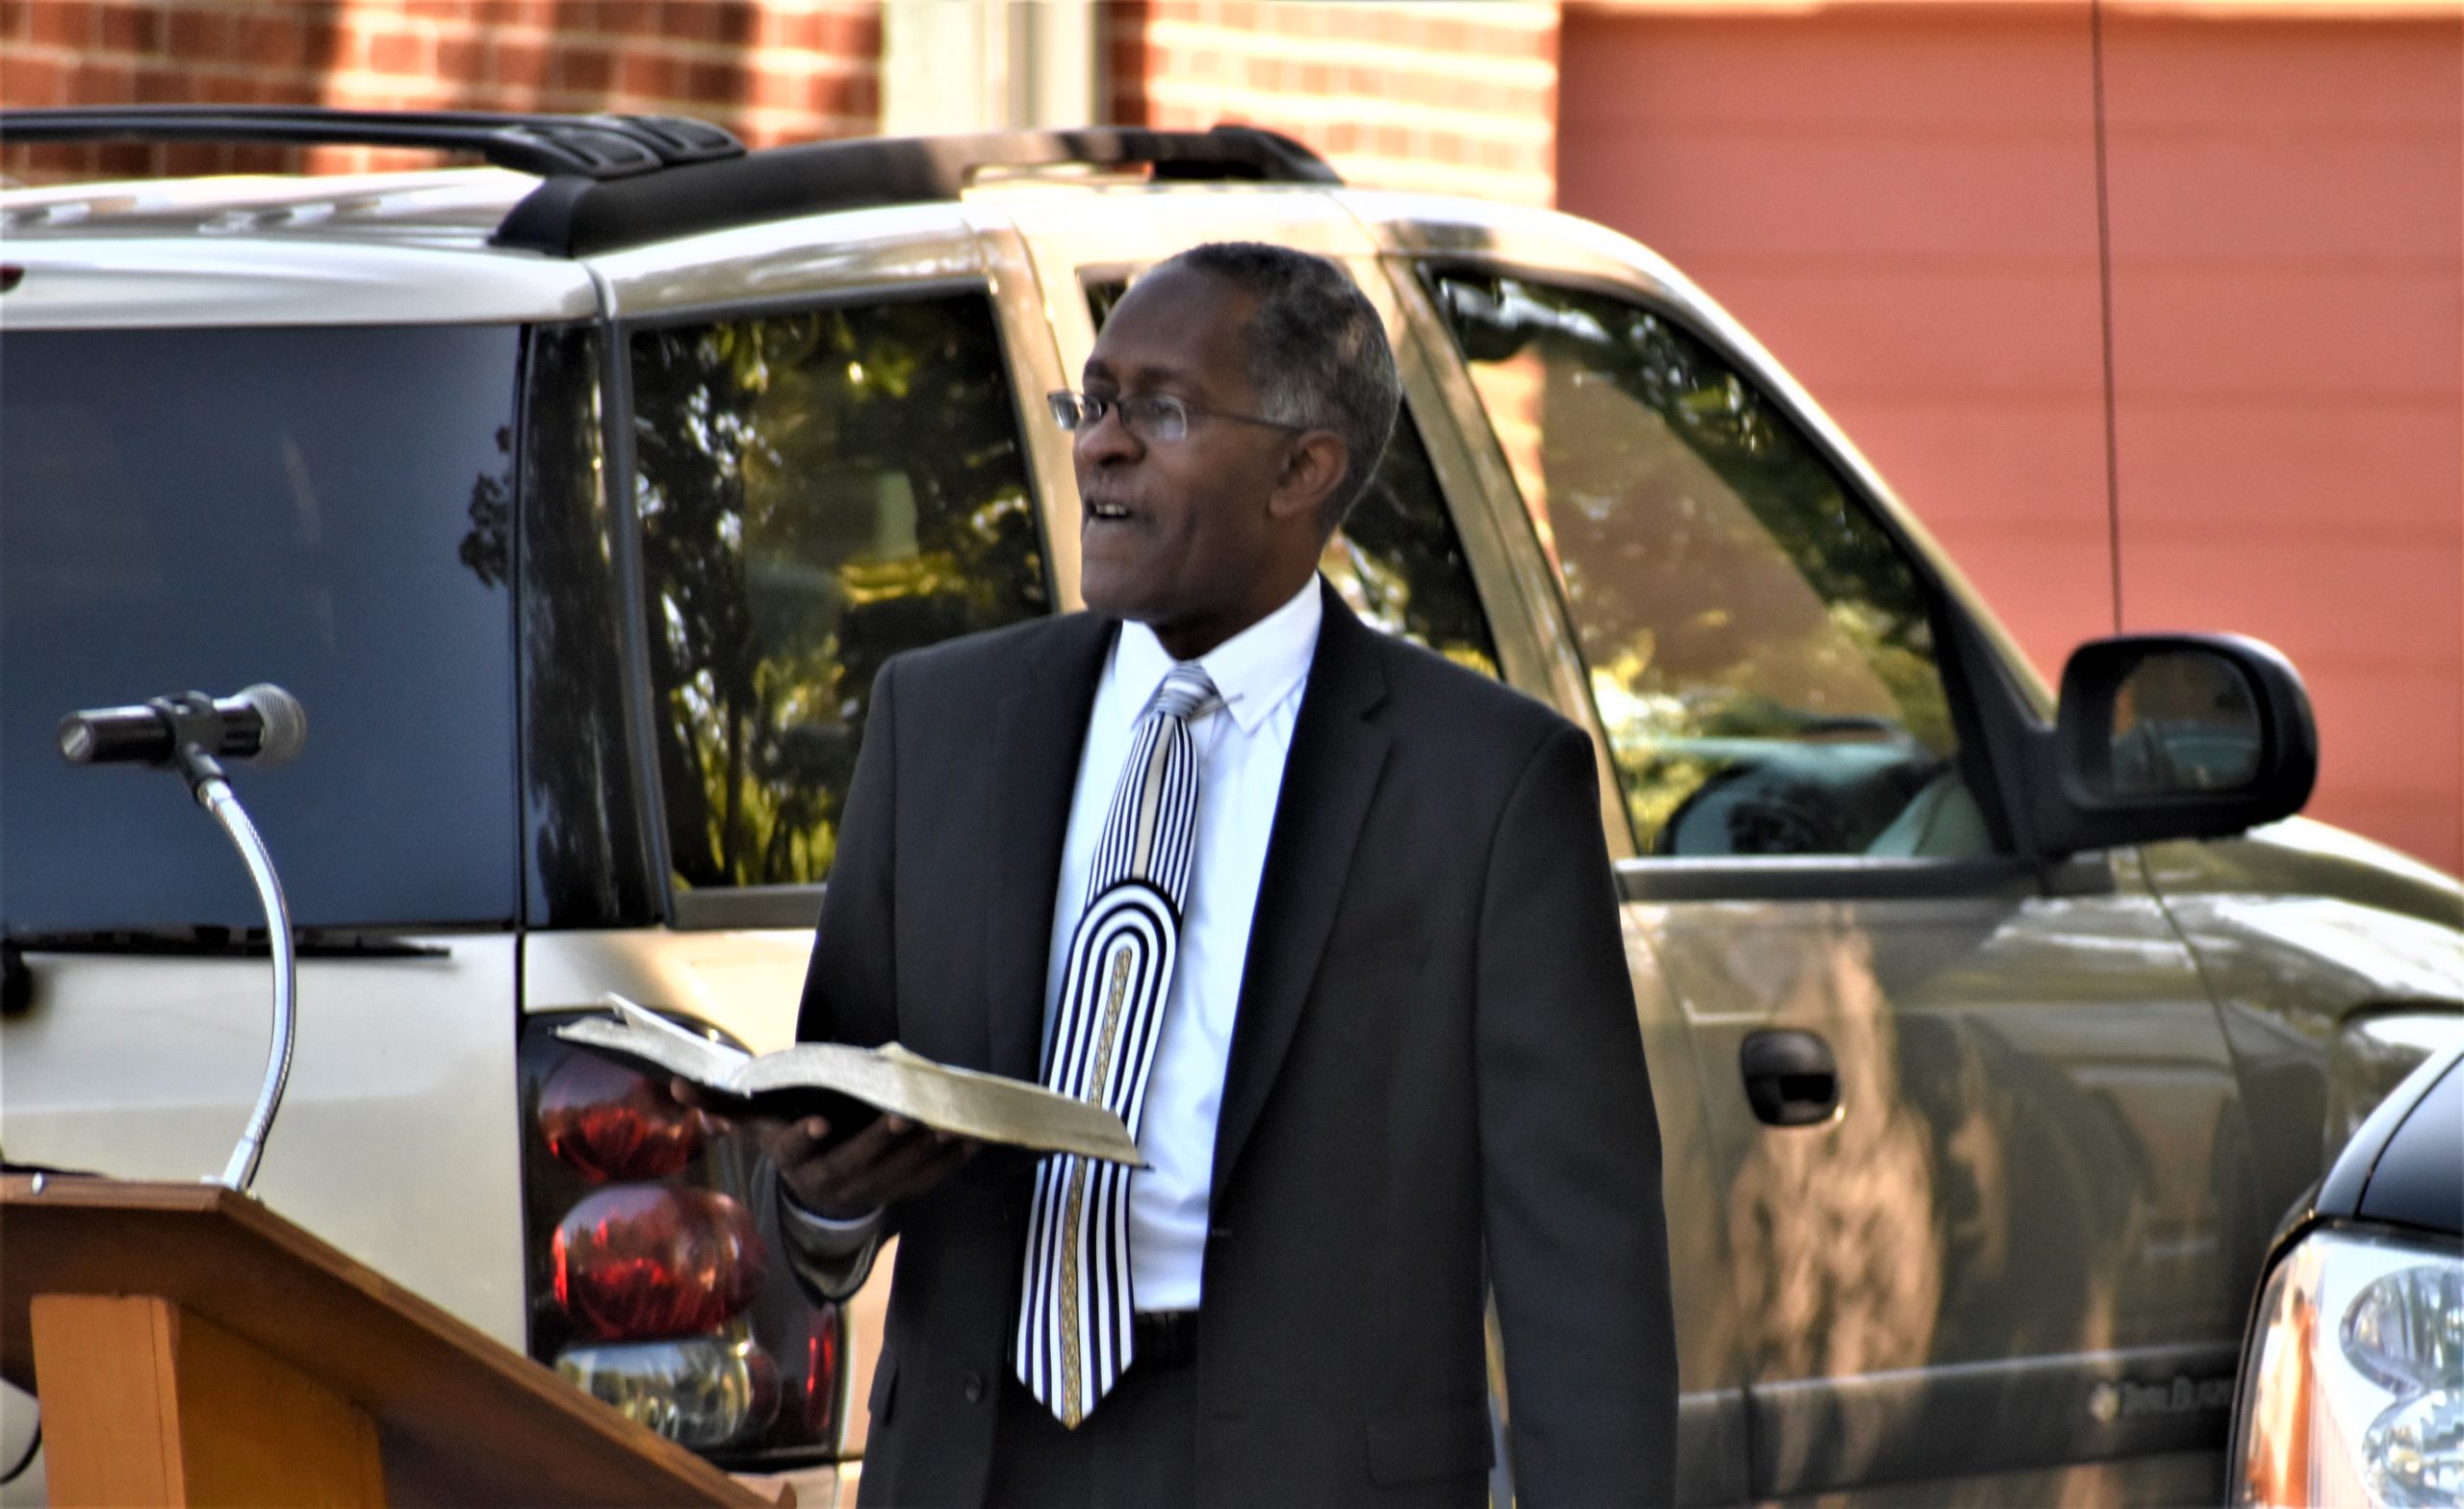 Rev. Raymond O. Brown, pastor of Mount Olive Missionary Baptist Church, left, preaches at a parking lot service Sept. 20.